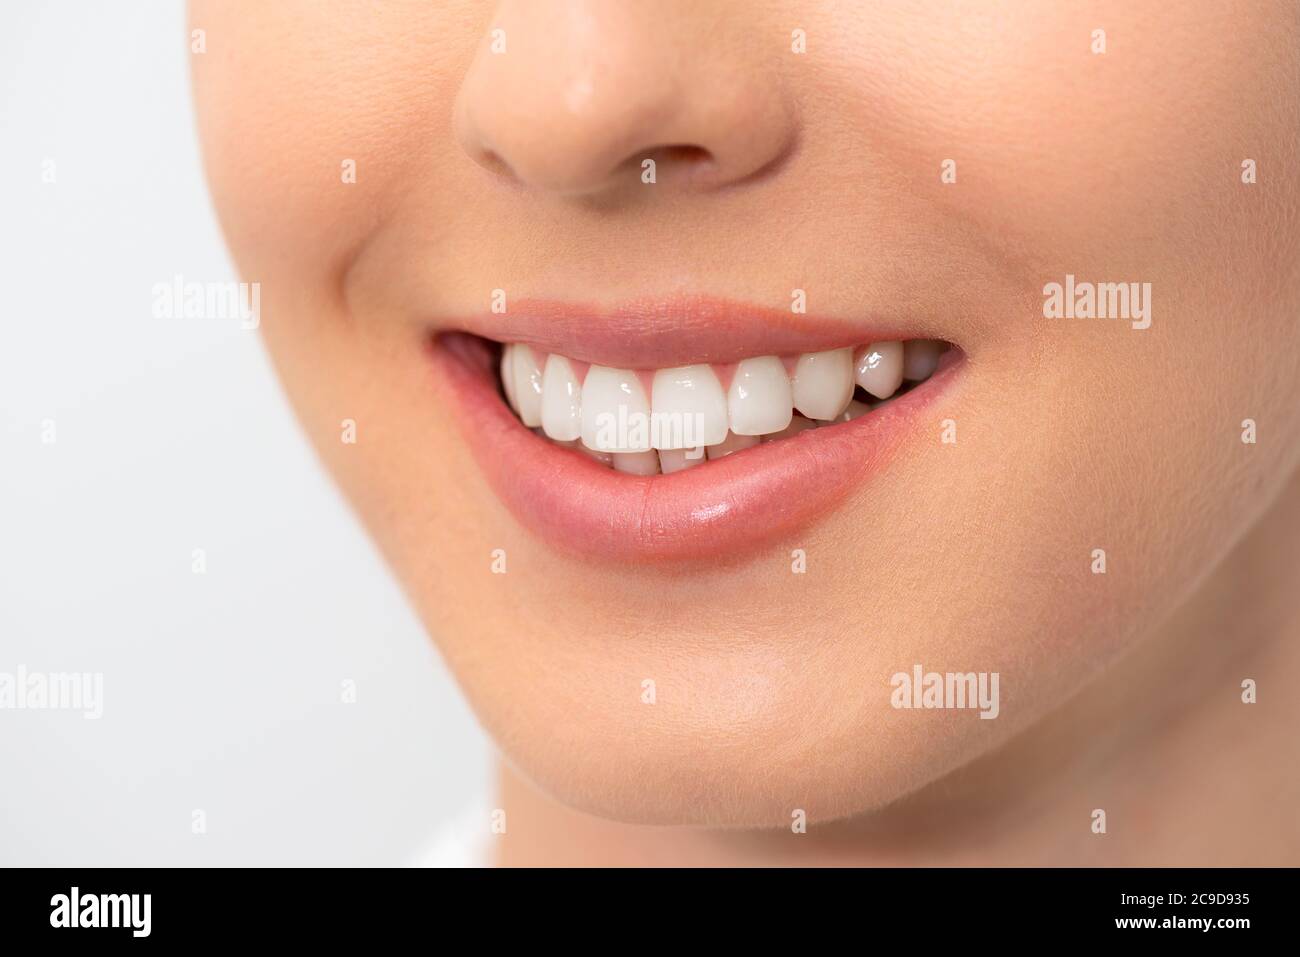 Woman with perfect smile. Teeth whitening, dental care concept Stock Photo